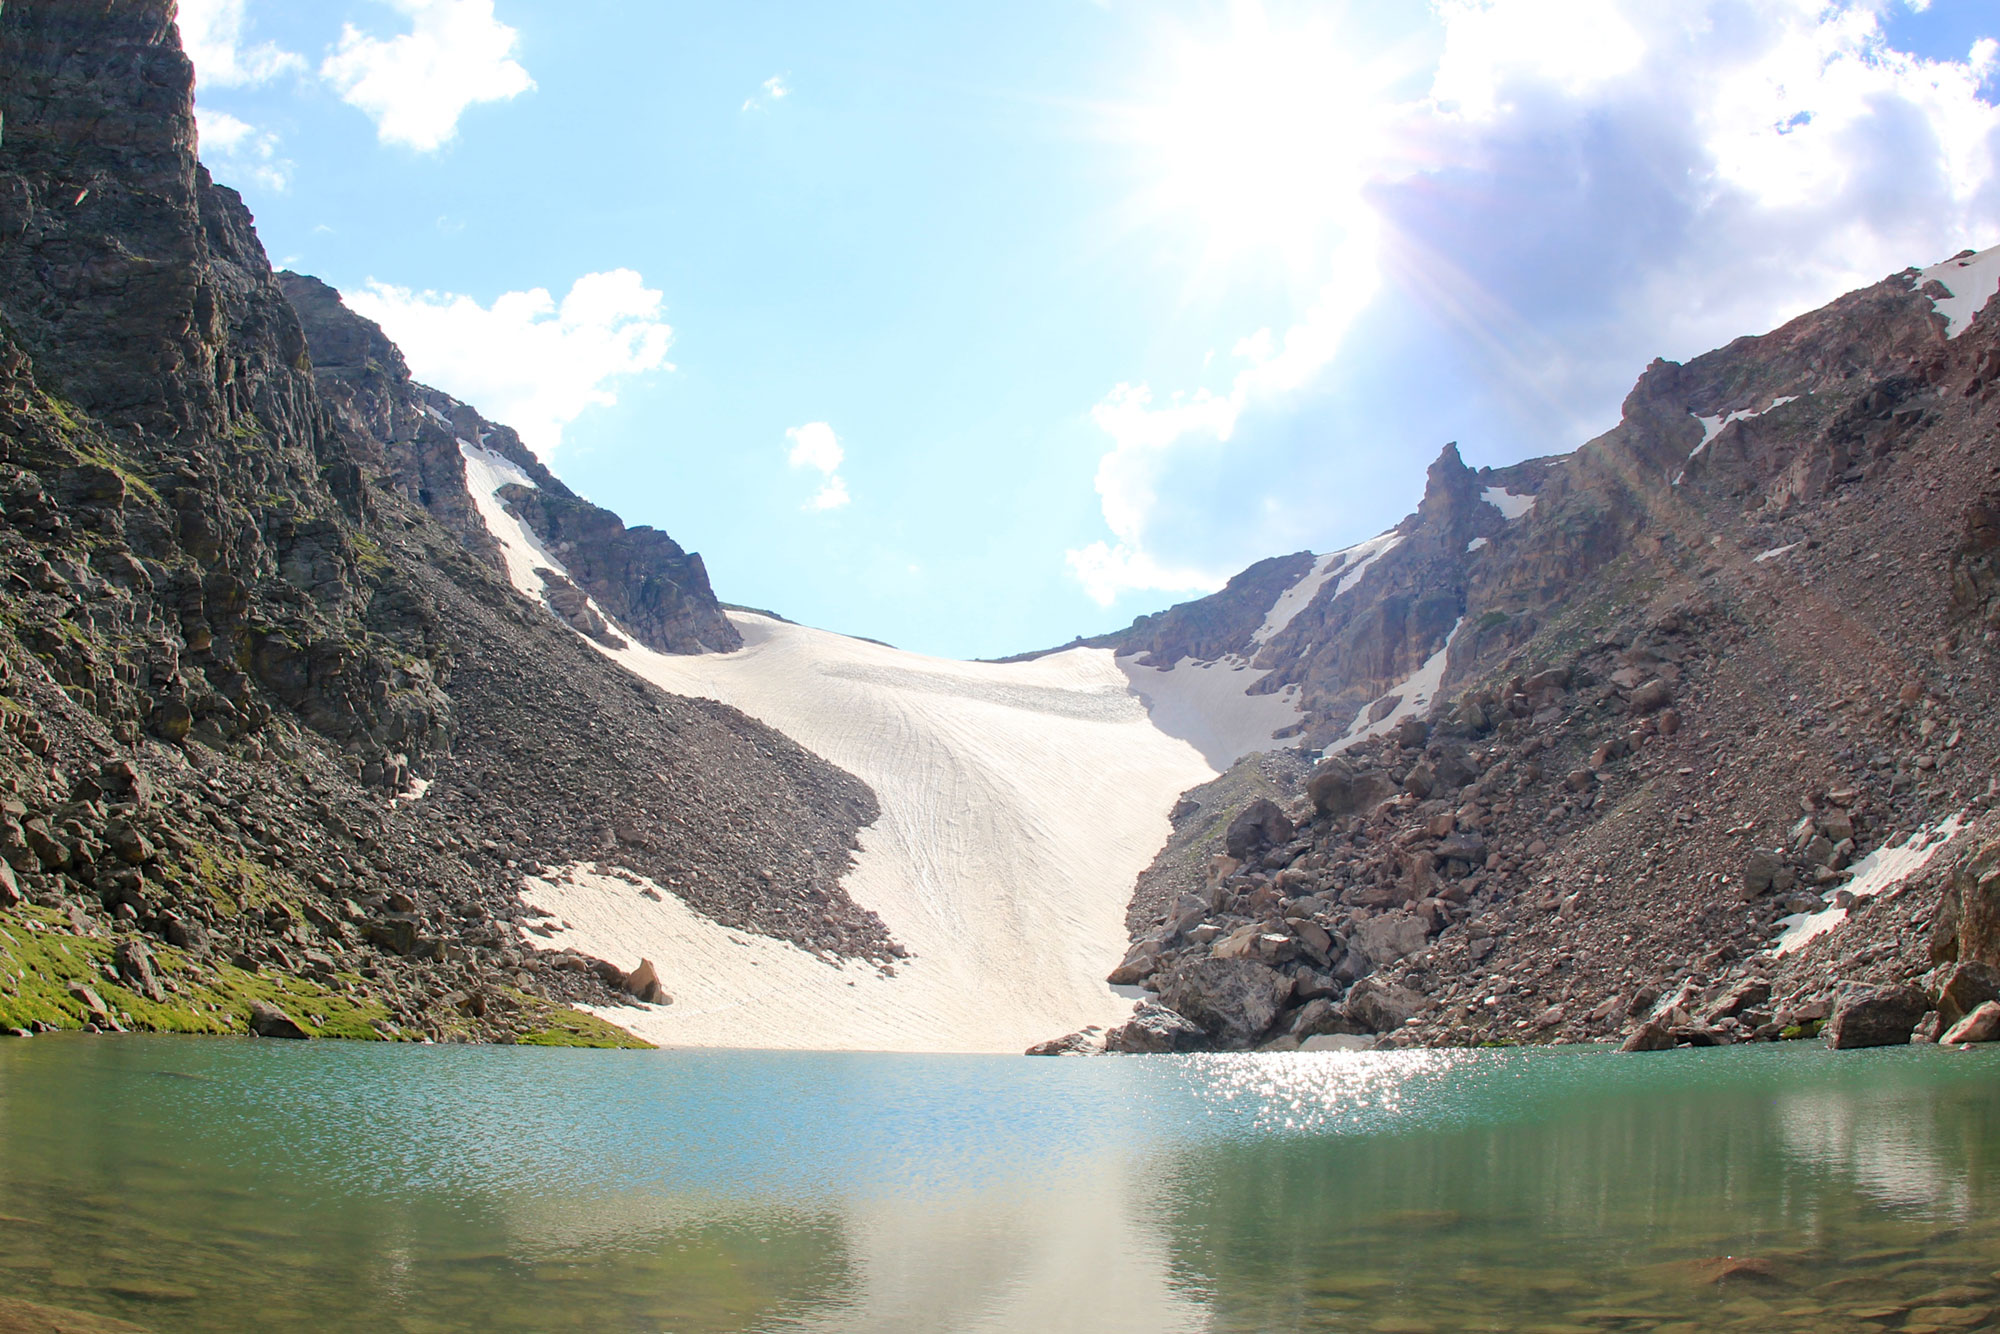 Photograph of Andrews Glacier in Rocky Mountain National Park. The photo shows a saddle between two hills. Snow (the glacier) occurs at the bottom of the saddle and appears to flow downhill, ending at the shore of a lake.